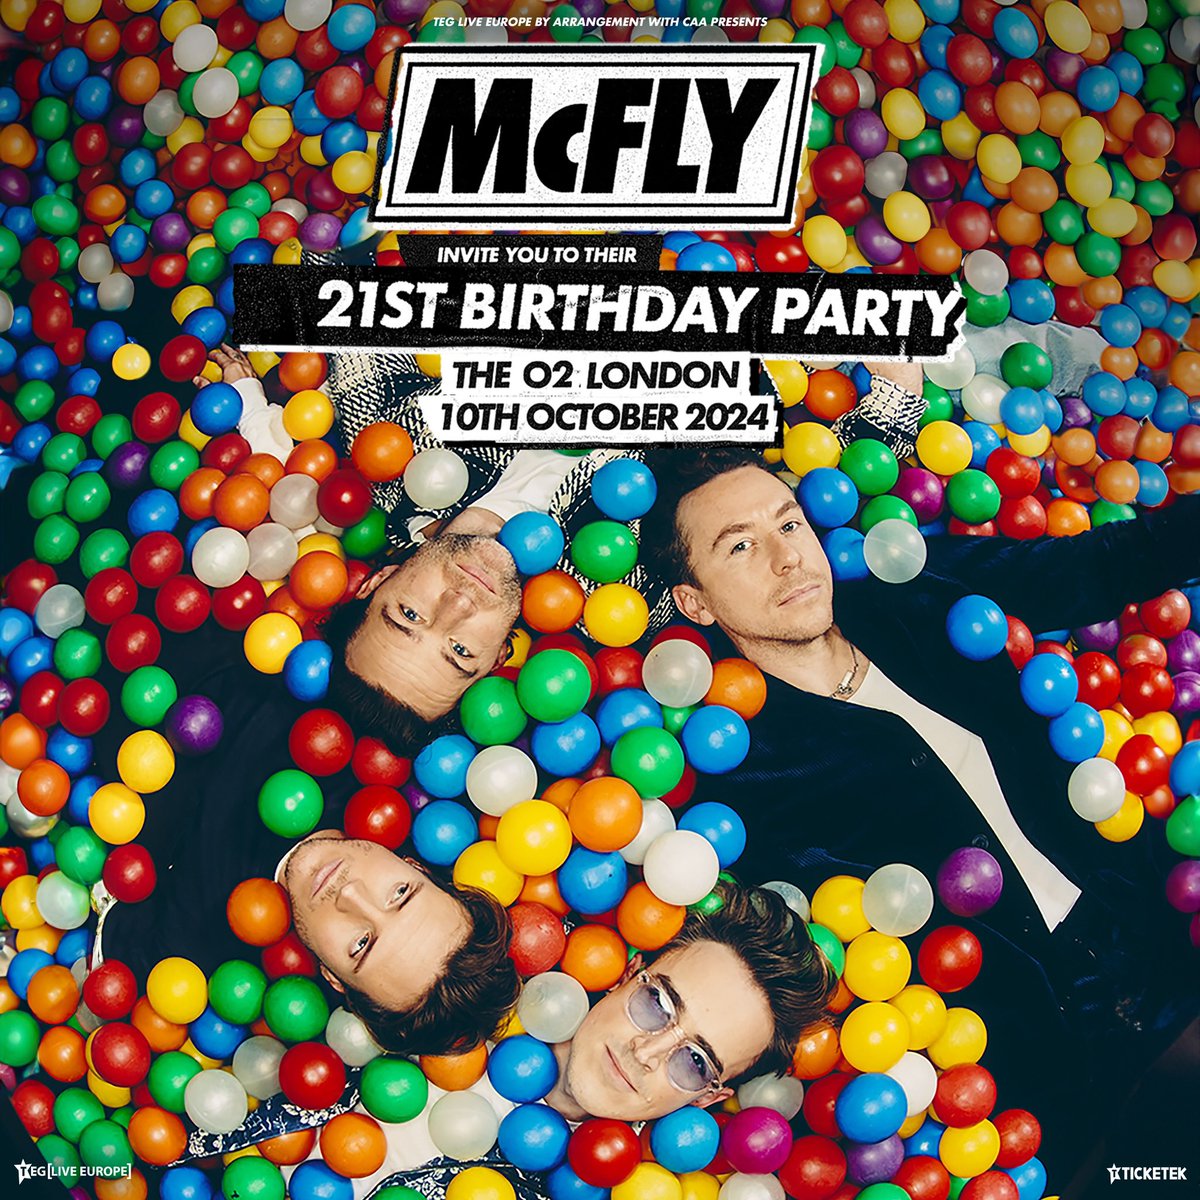 This year McFly turns 21 YEARS OLD… no, we can’t believe it either. To celebrate we’re throwing a massive birthday party at @TheO2 on 10th October and everyone’s invited! Tickets go on sale Friday 23rd February, or sign up via the link for an exclusive presale on Wednesday ⚡️